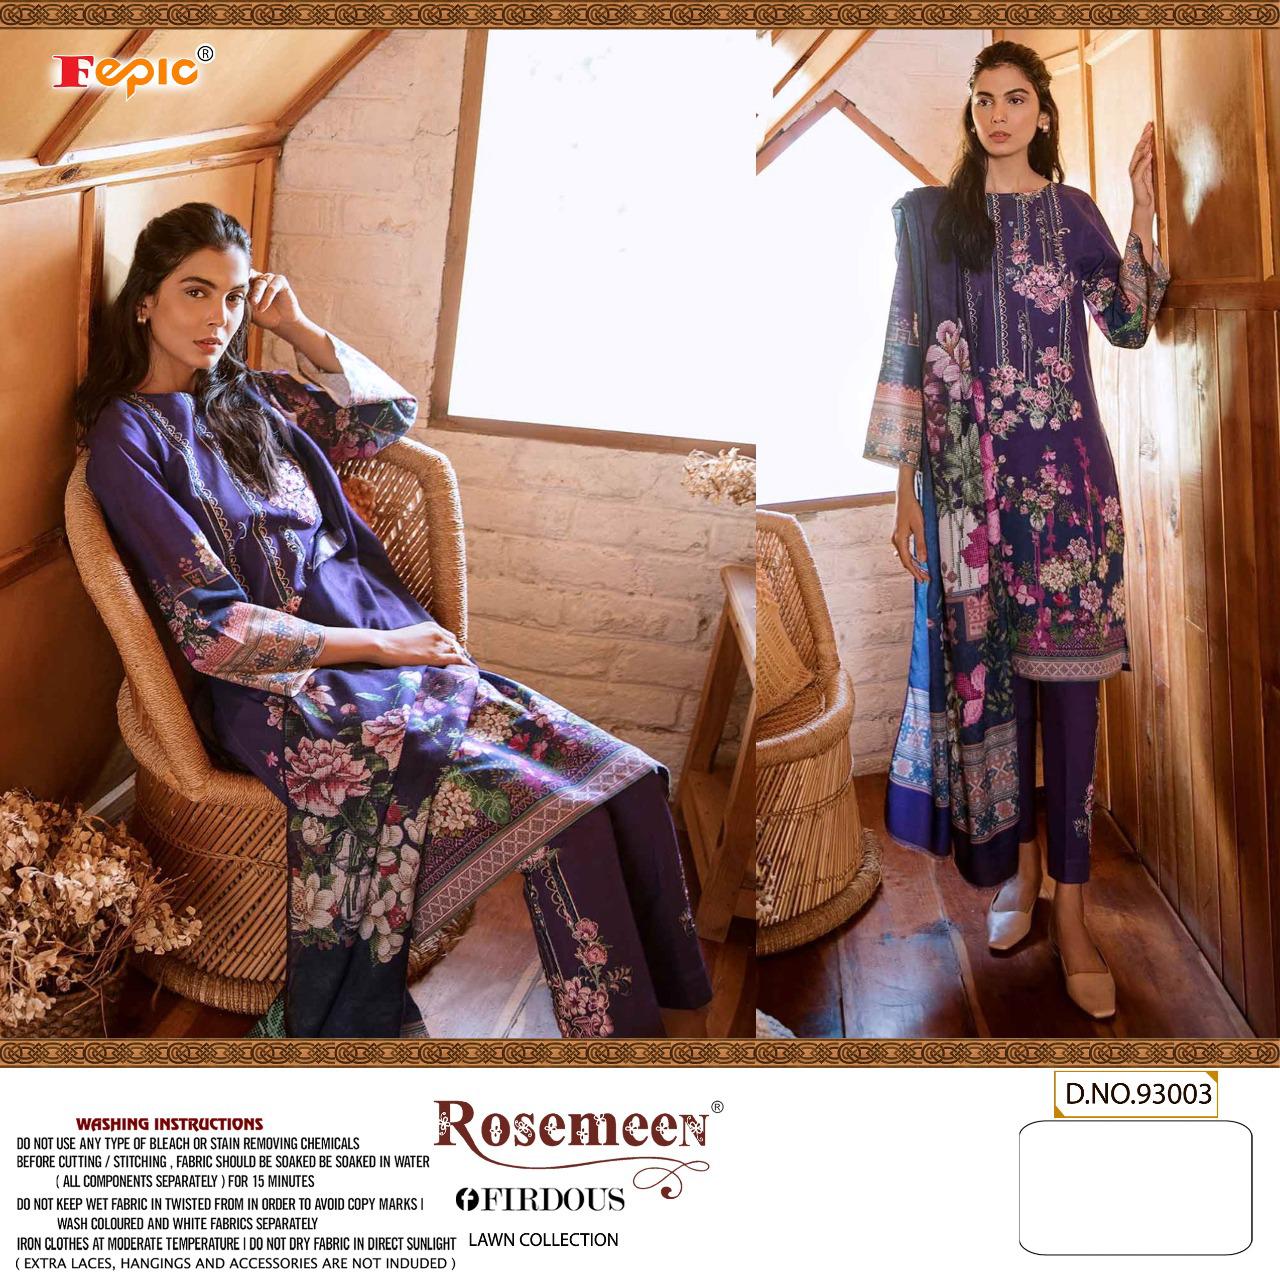 Fepic Rosemeen Firdous Lawn Collection 93003